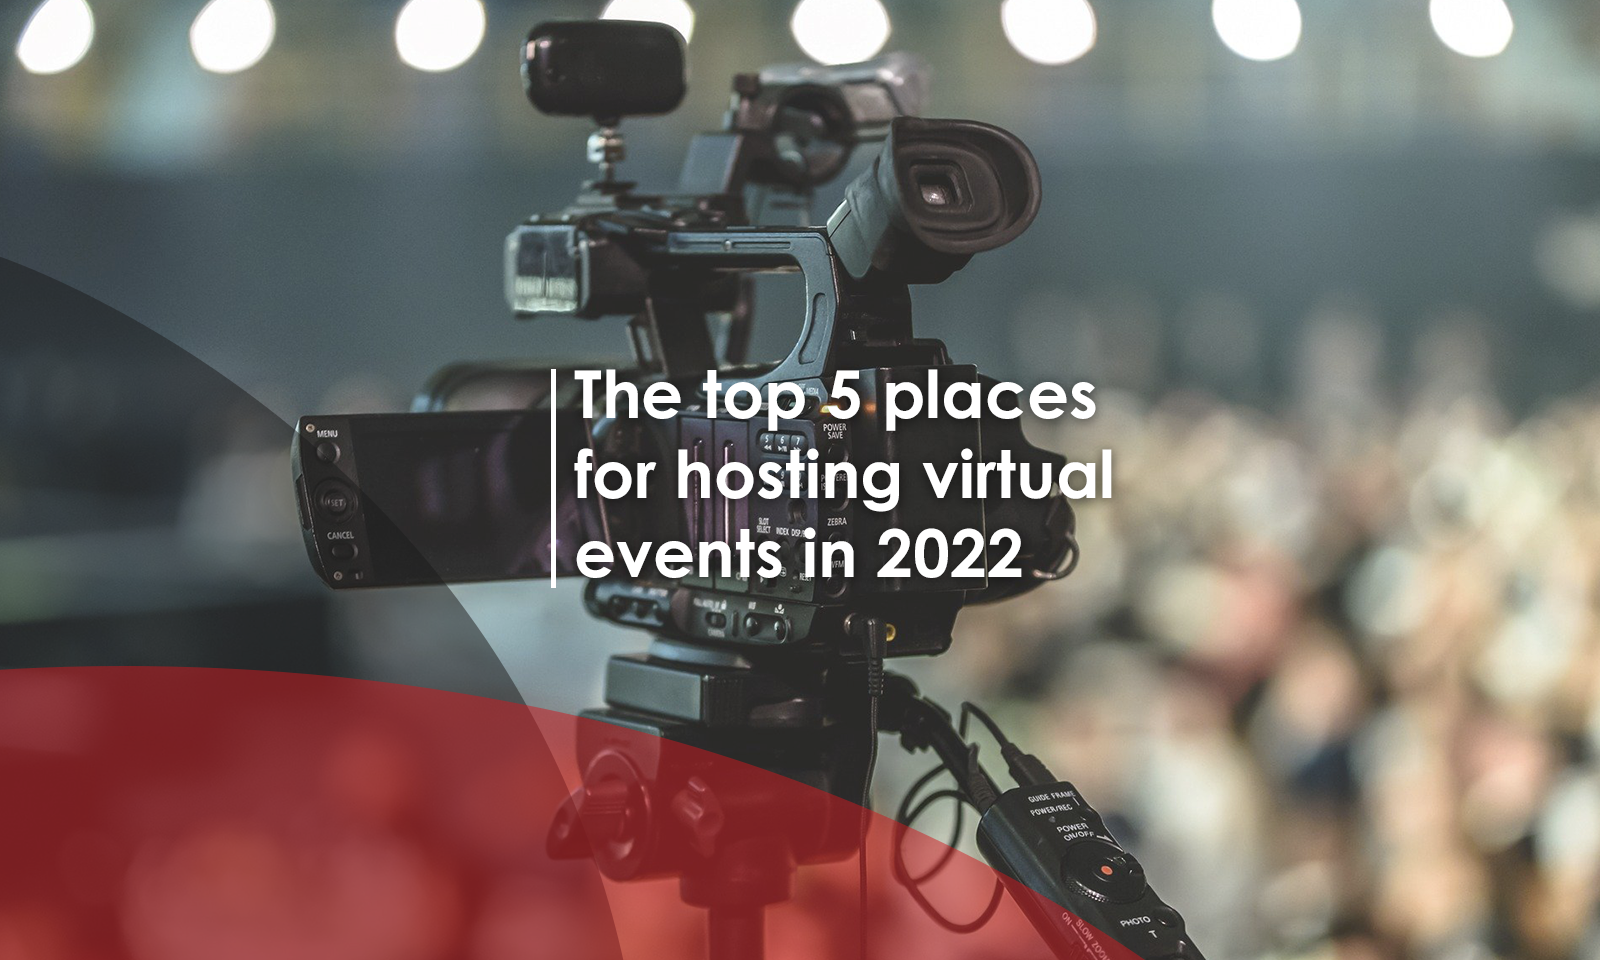 The top 5 places for hosting virtual events in 2022